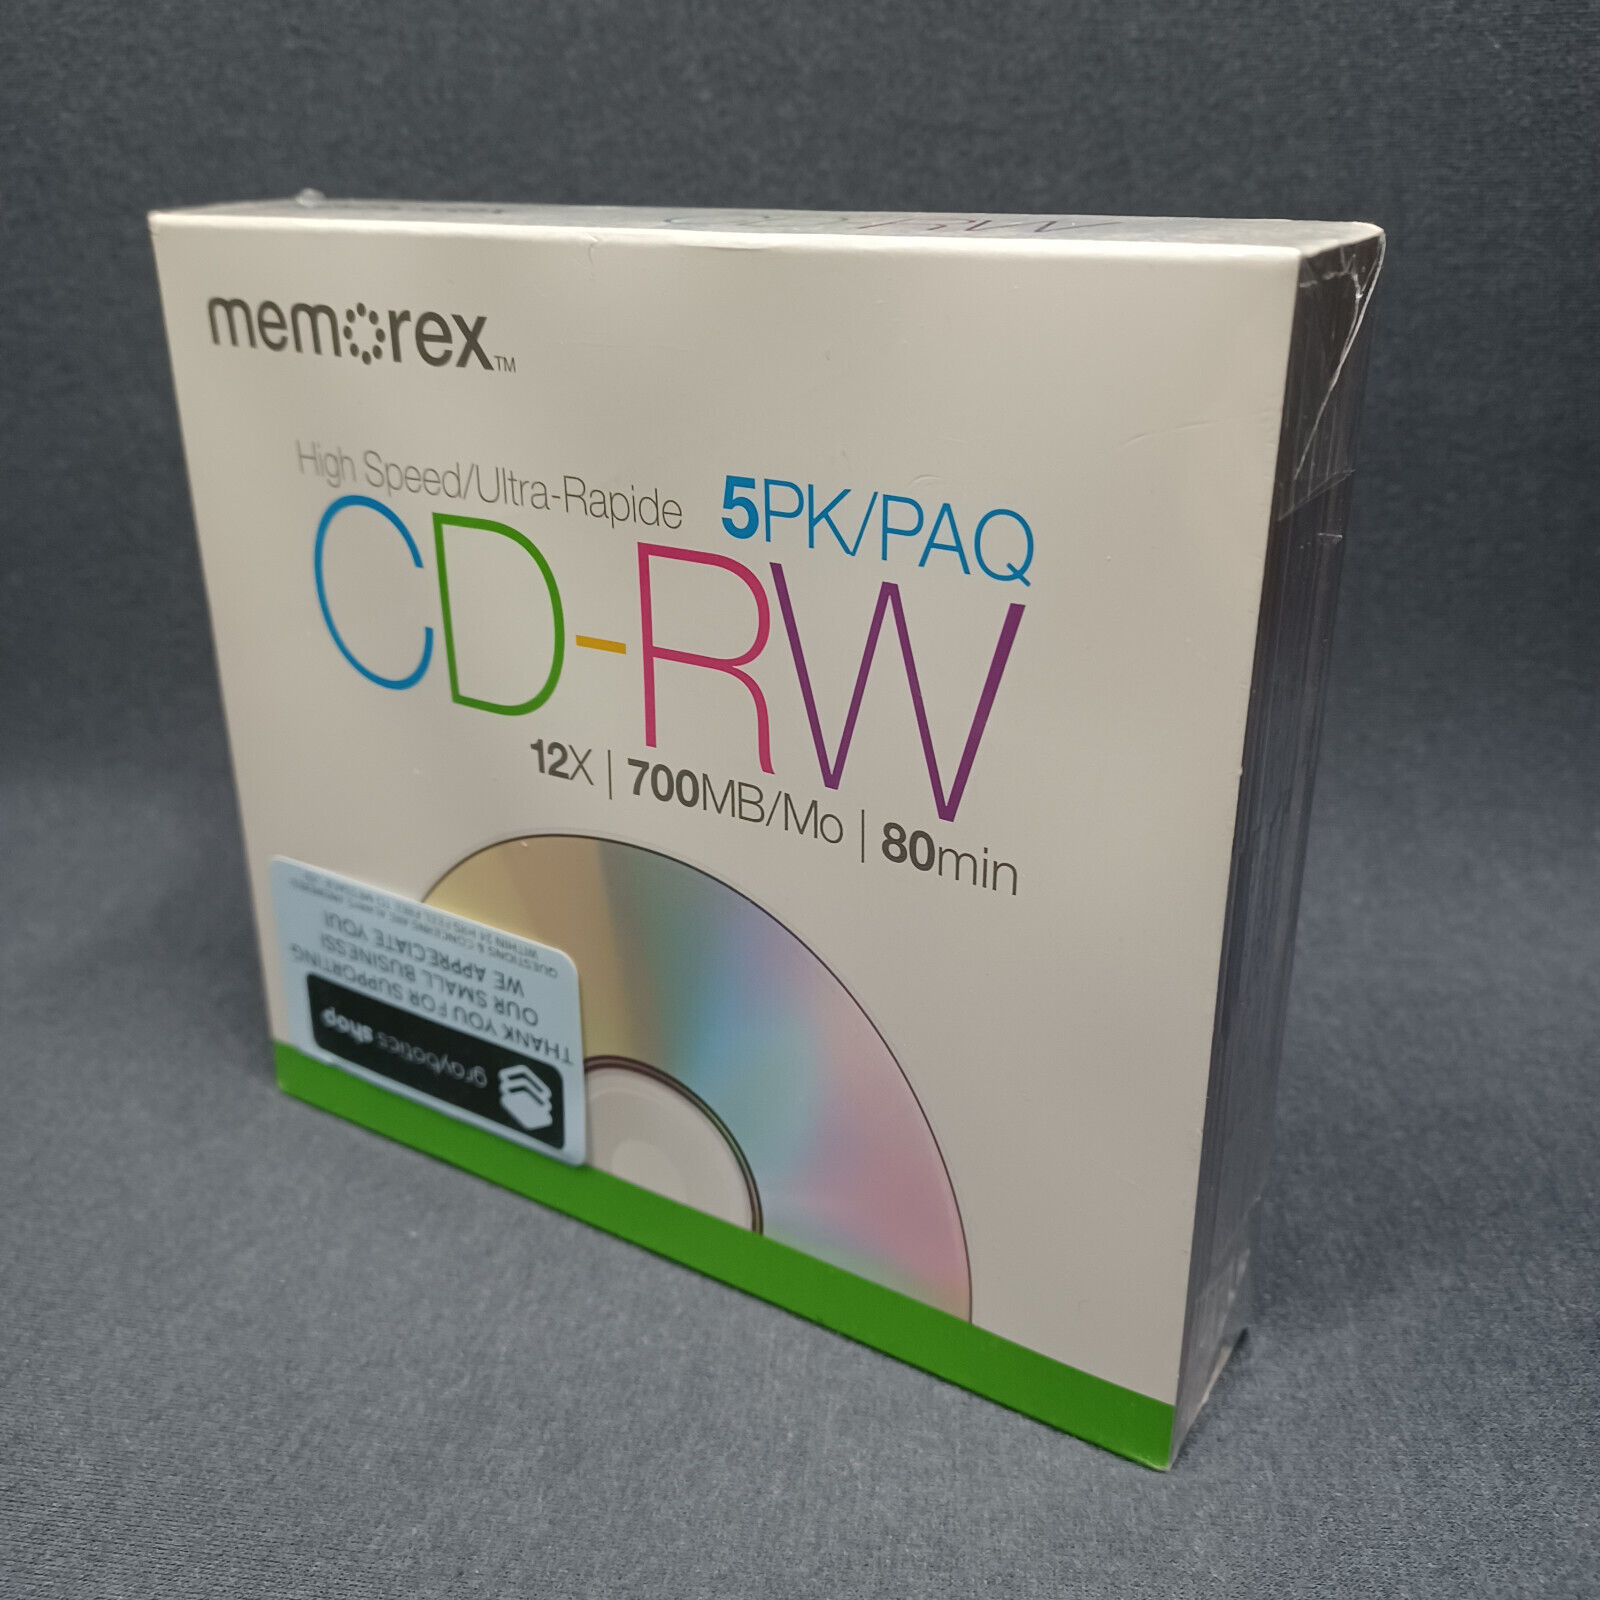 *new Sealed* 5pk Memorex Cd-rw 12x 700mb 80min With Jewel Cases 5-pack